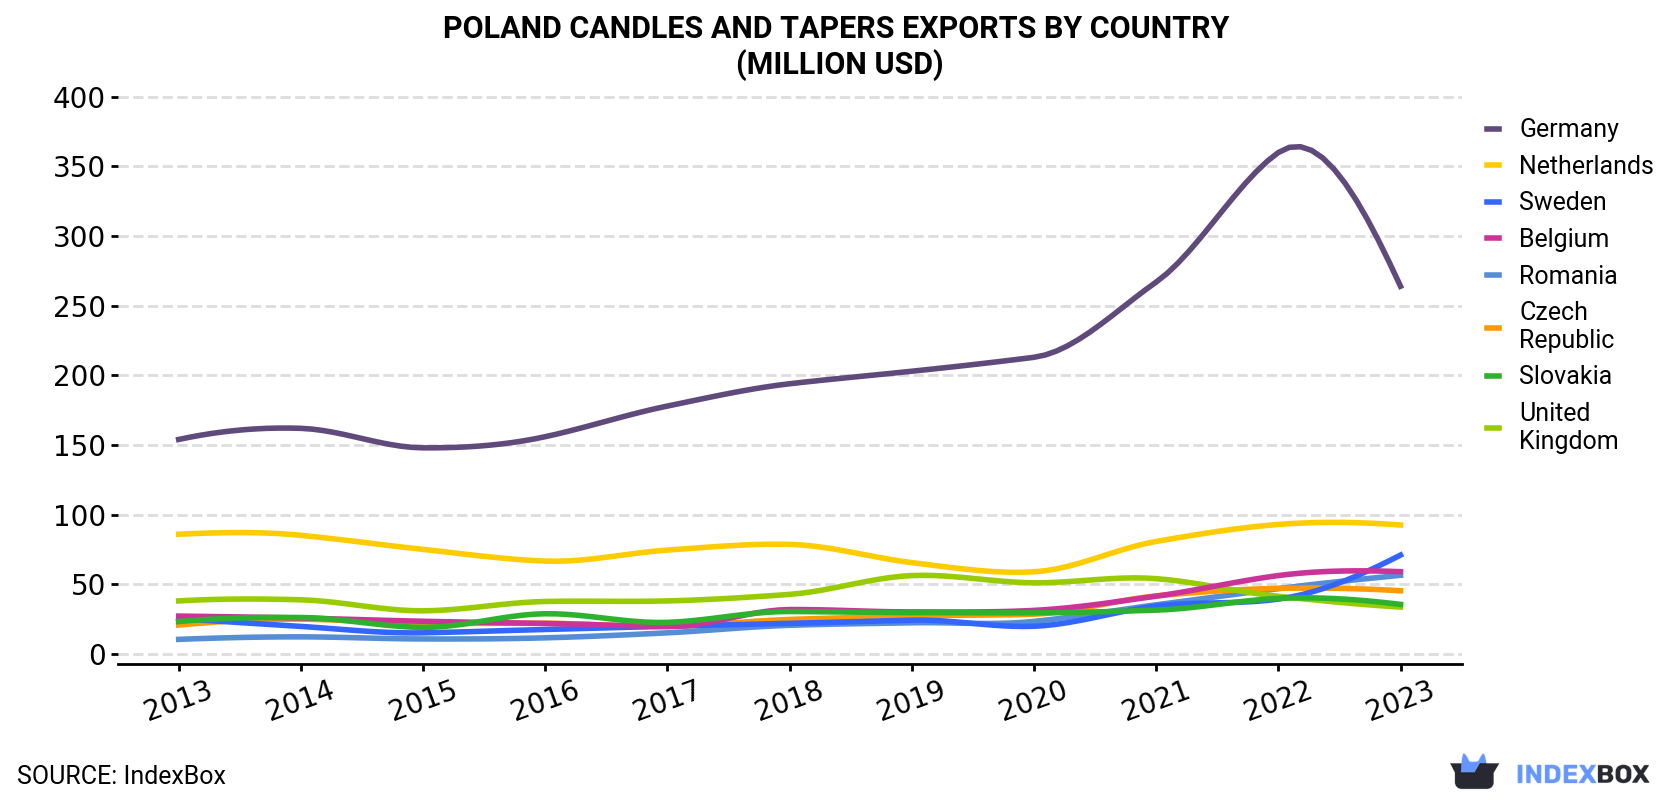 Poland Candles And Tapers Exports By Country (Million USD)